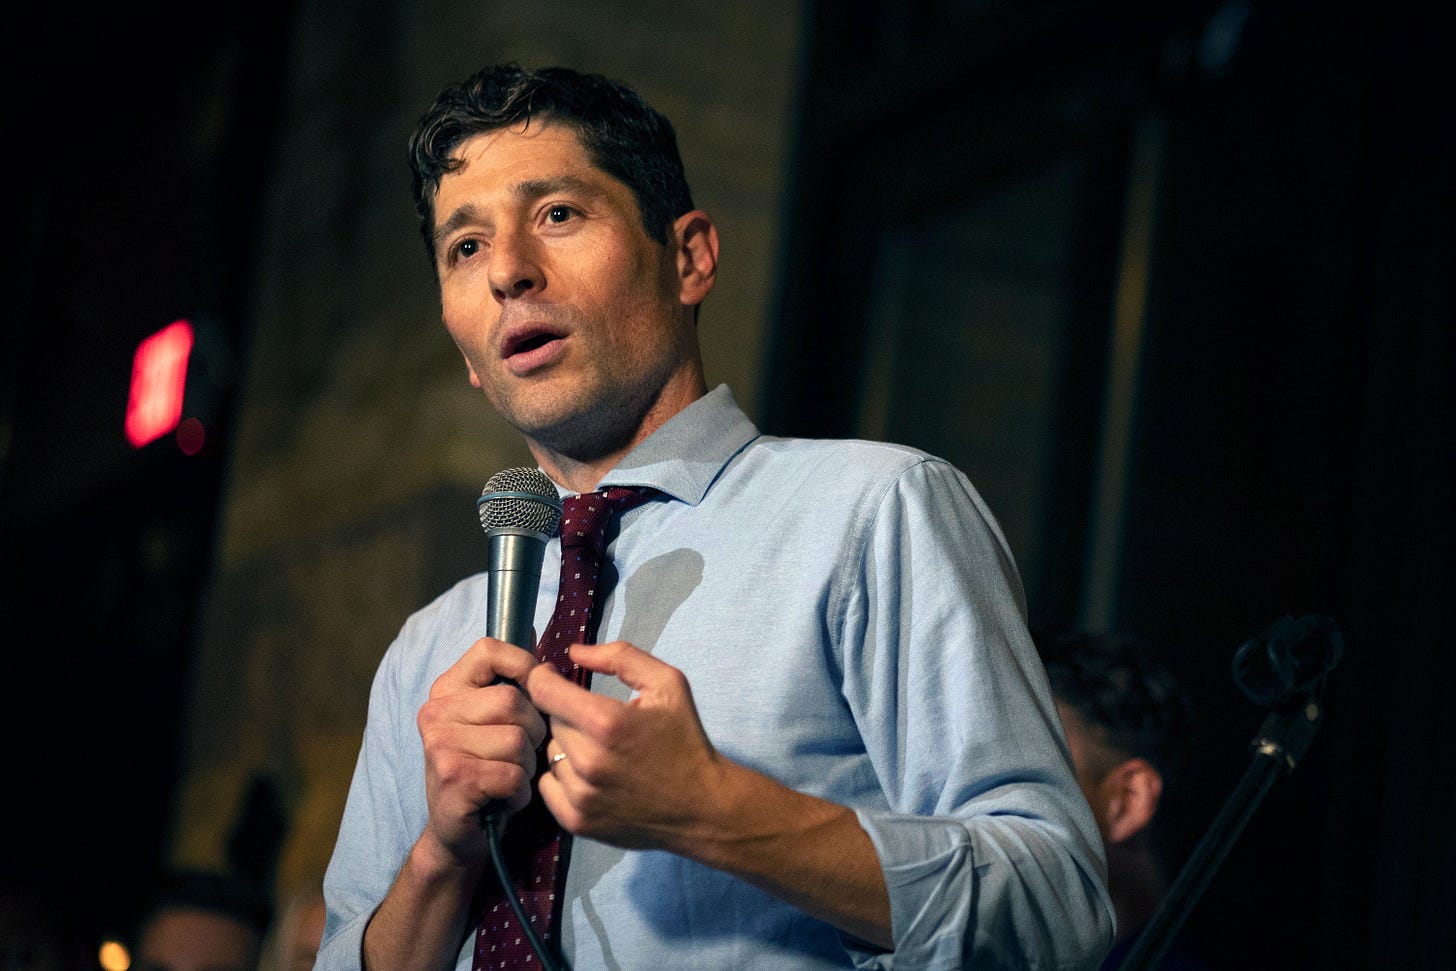 Minneapolis Mayor Jacob Frey will be reelected, election officials report